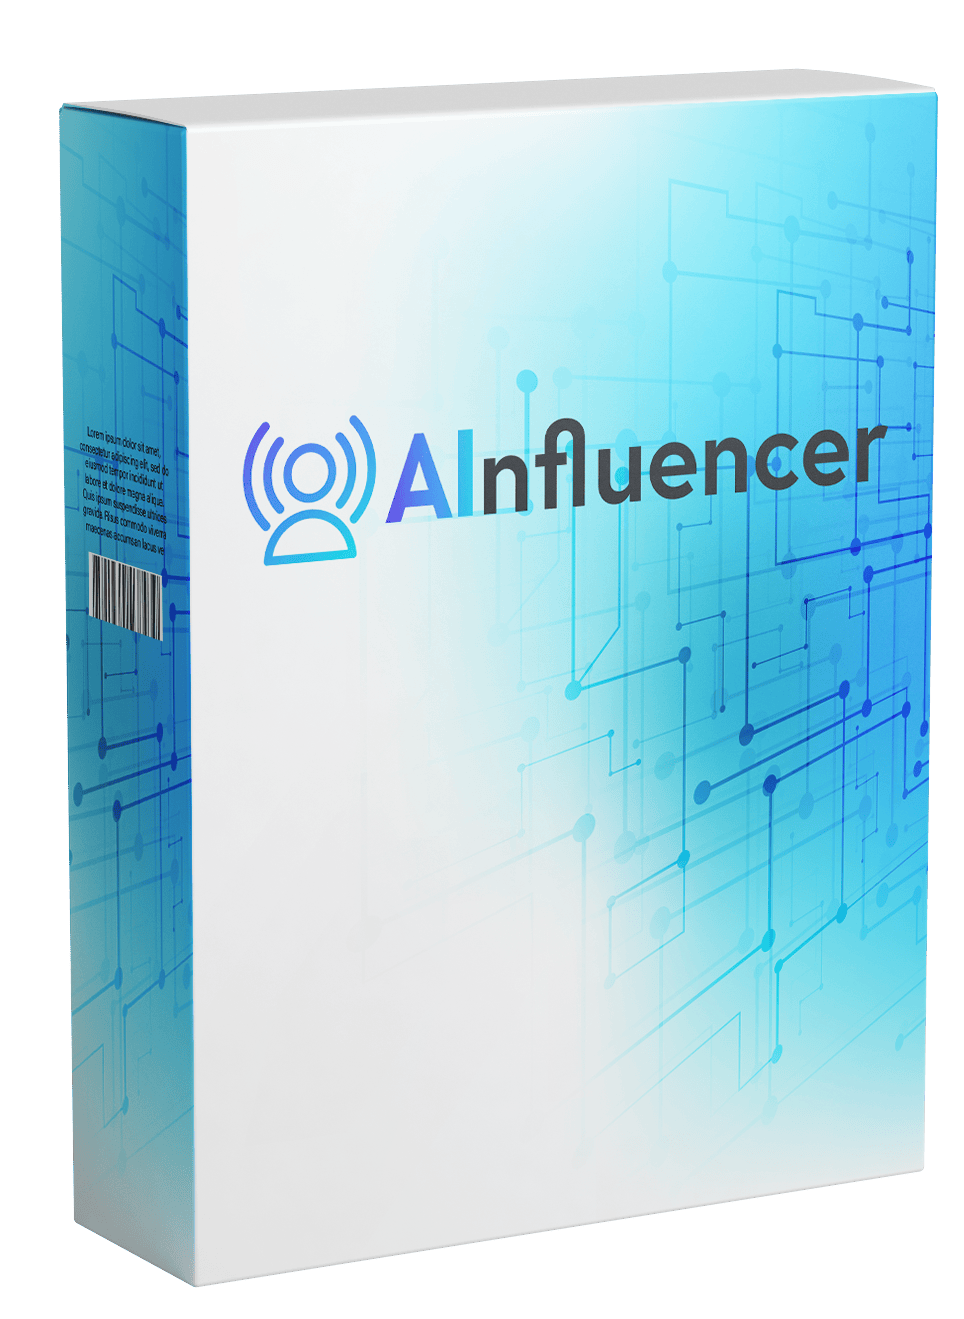 ai influencer review,ainfluencer review,ai influencer,ainfluencer bonuses,ai influencer reviews,ainfluencer bonus,ai influencer scam,ainfluencer demo,ainfluencer,midjourney,artificial intelligence,james renouf,ai images